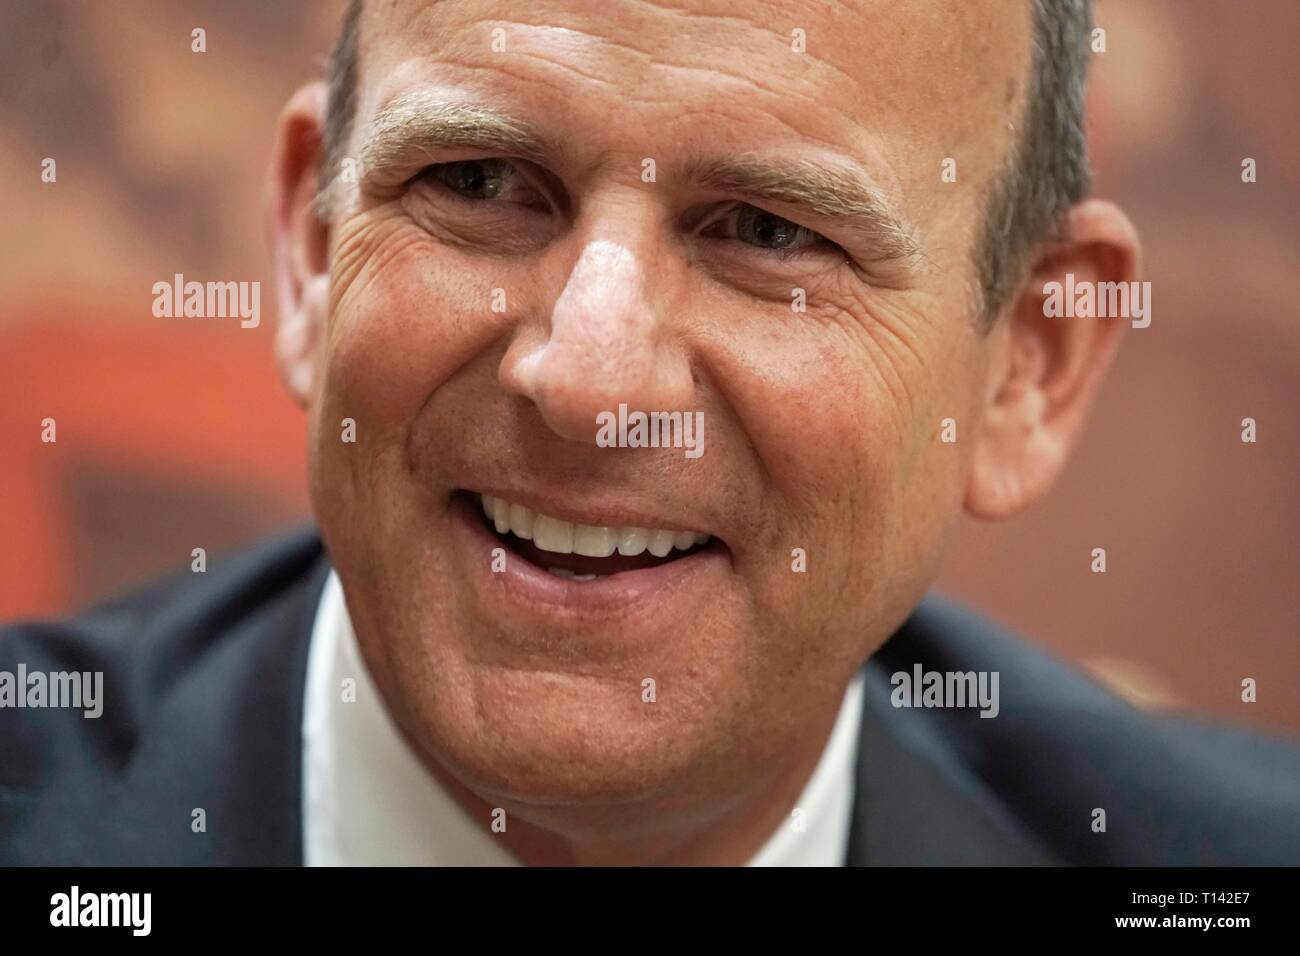 Beijing, China, 23rd march, 2019. (190323) -- BEIJING, March 23, 2019 (Xinhua) -- Doug DeVos, co-chairman of the Board of Amway Corporation, receives an interview with Xinhua during the China Development Forum 2019 in Beijing, capital of China, March 23, 2019. The three-day China Development Forum, which kicked off Saturday, will focus on key issues such as the supply-side structural reform, new measures of proactive fiscal policy, and the opening-up of the financial sector and financial stability. Credit: Xinhua/Alamy Live News Stock Photo